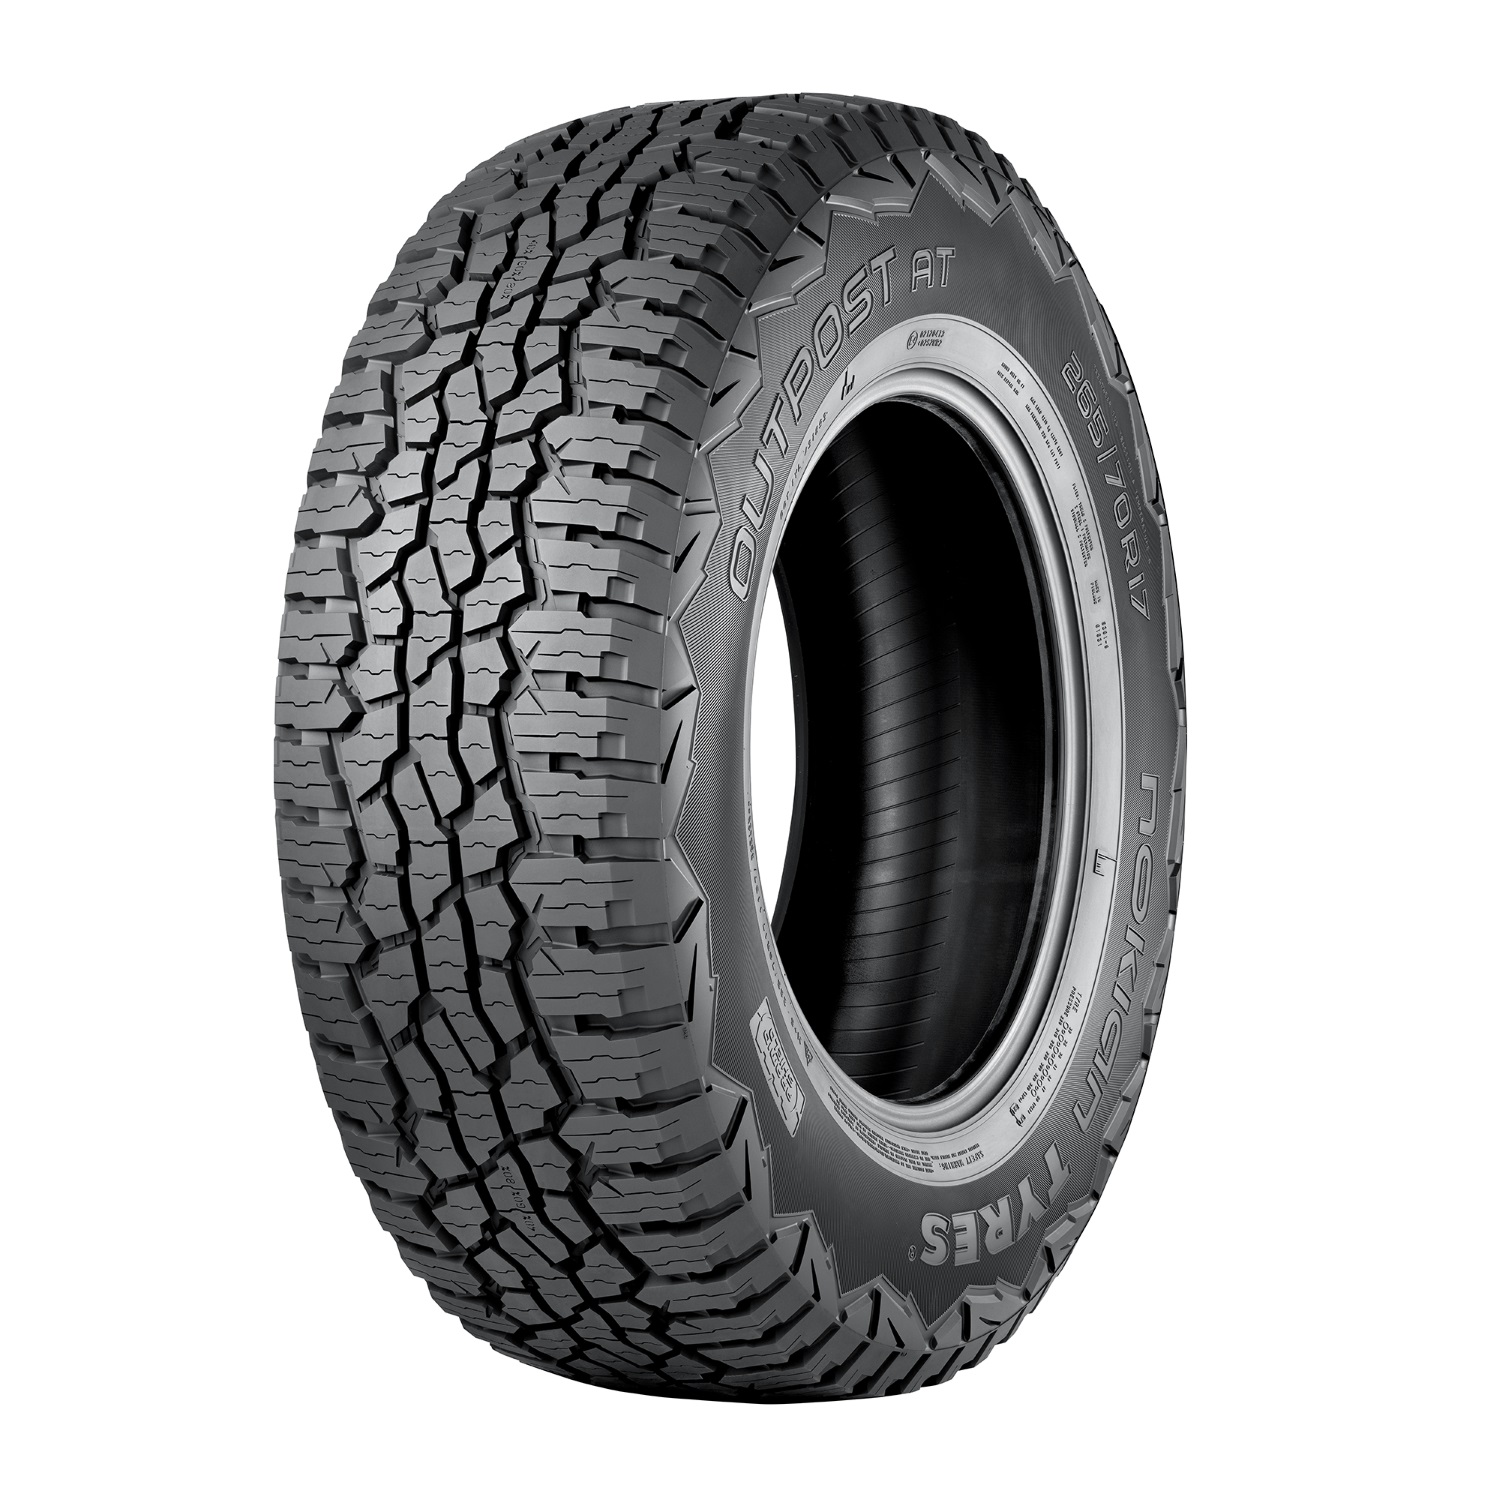 Nokian_Tyres_OUTPOST_AT_SUV_M+_3PMSF_225/75_R16_115/112S_off_road,_4x4,_suv_nyári_gumi